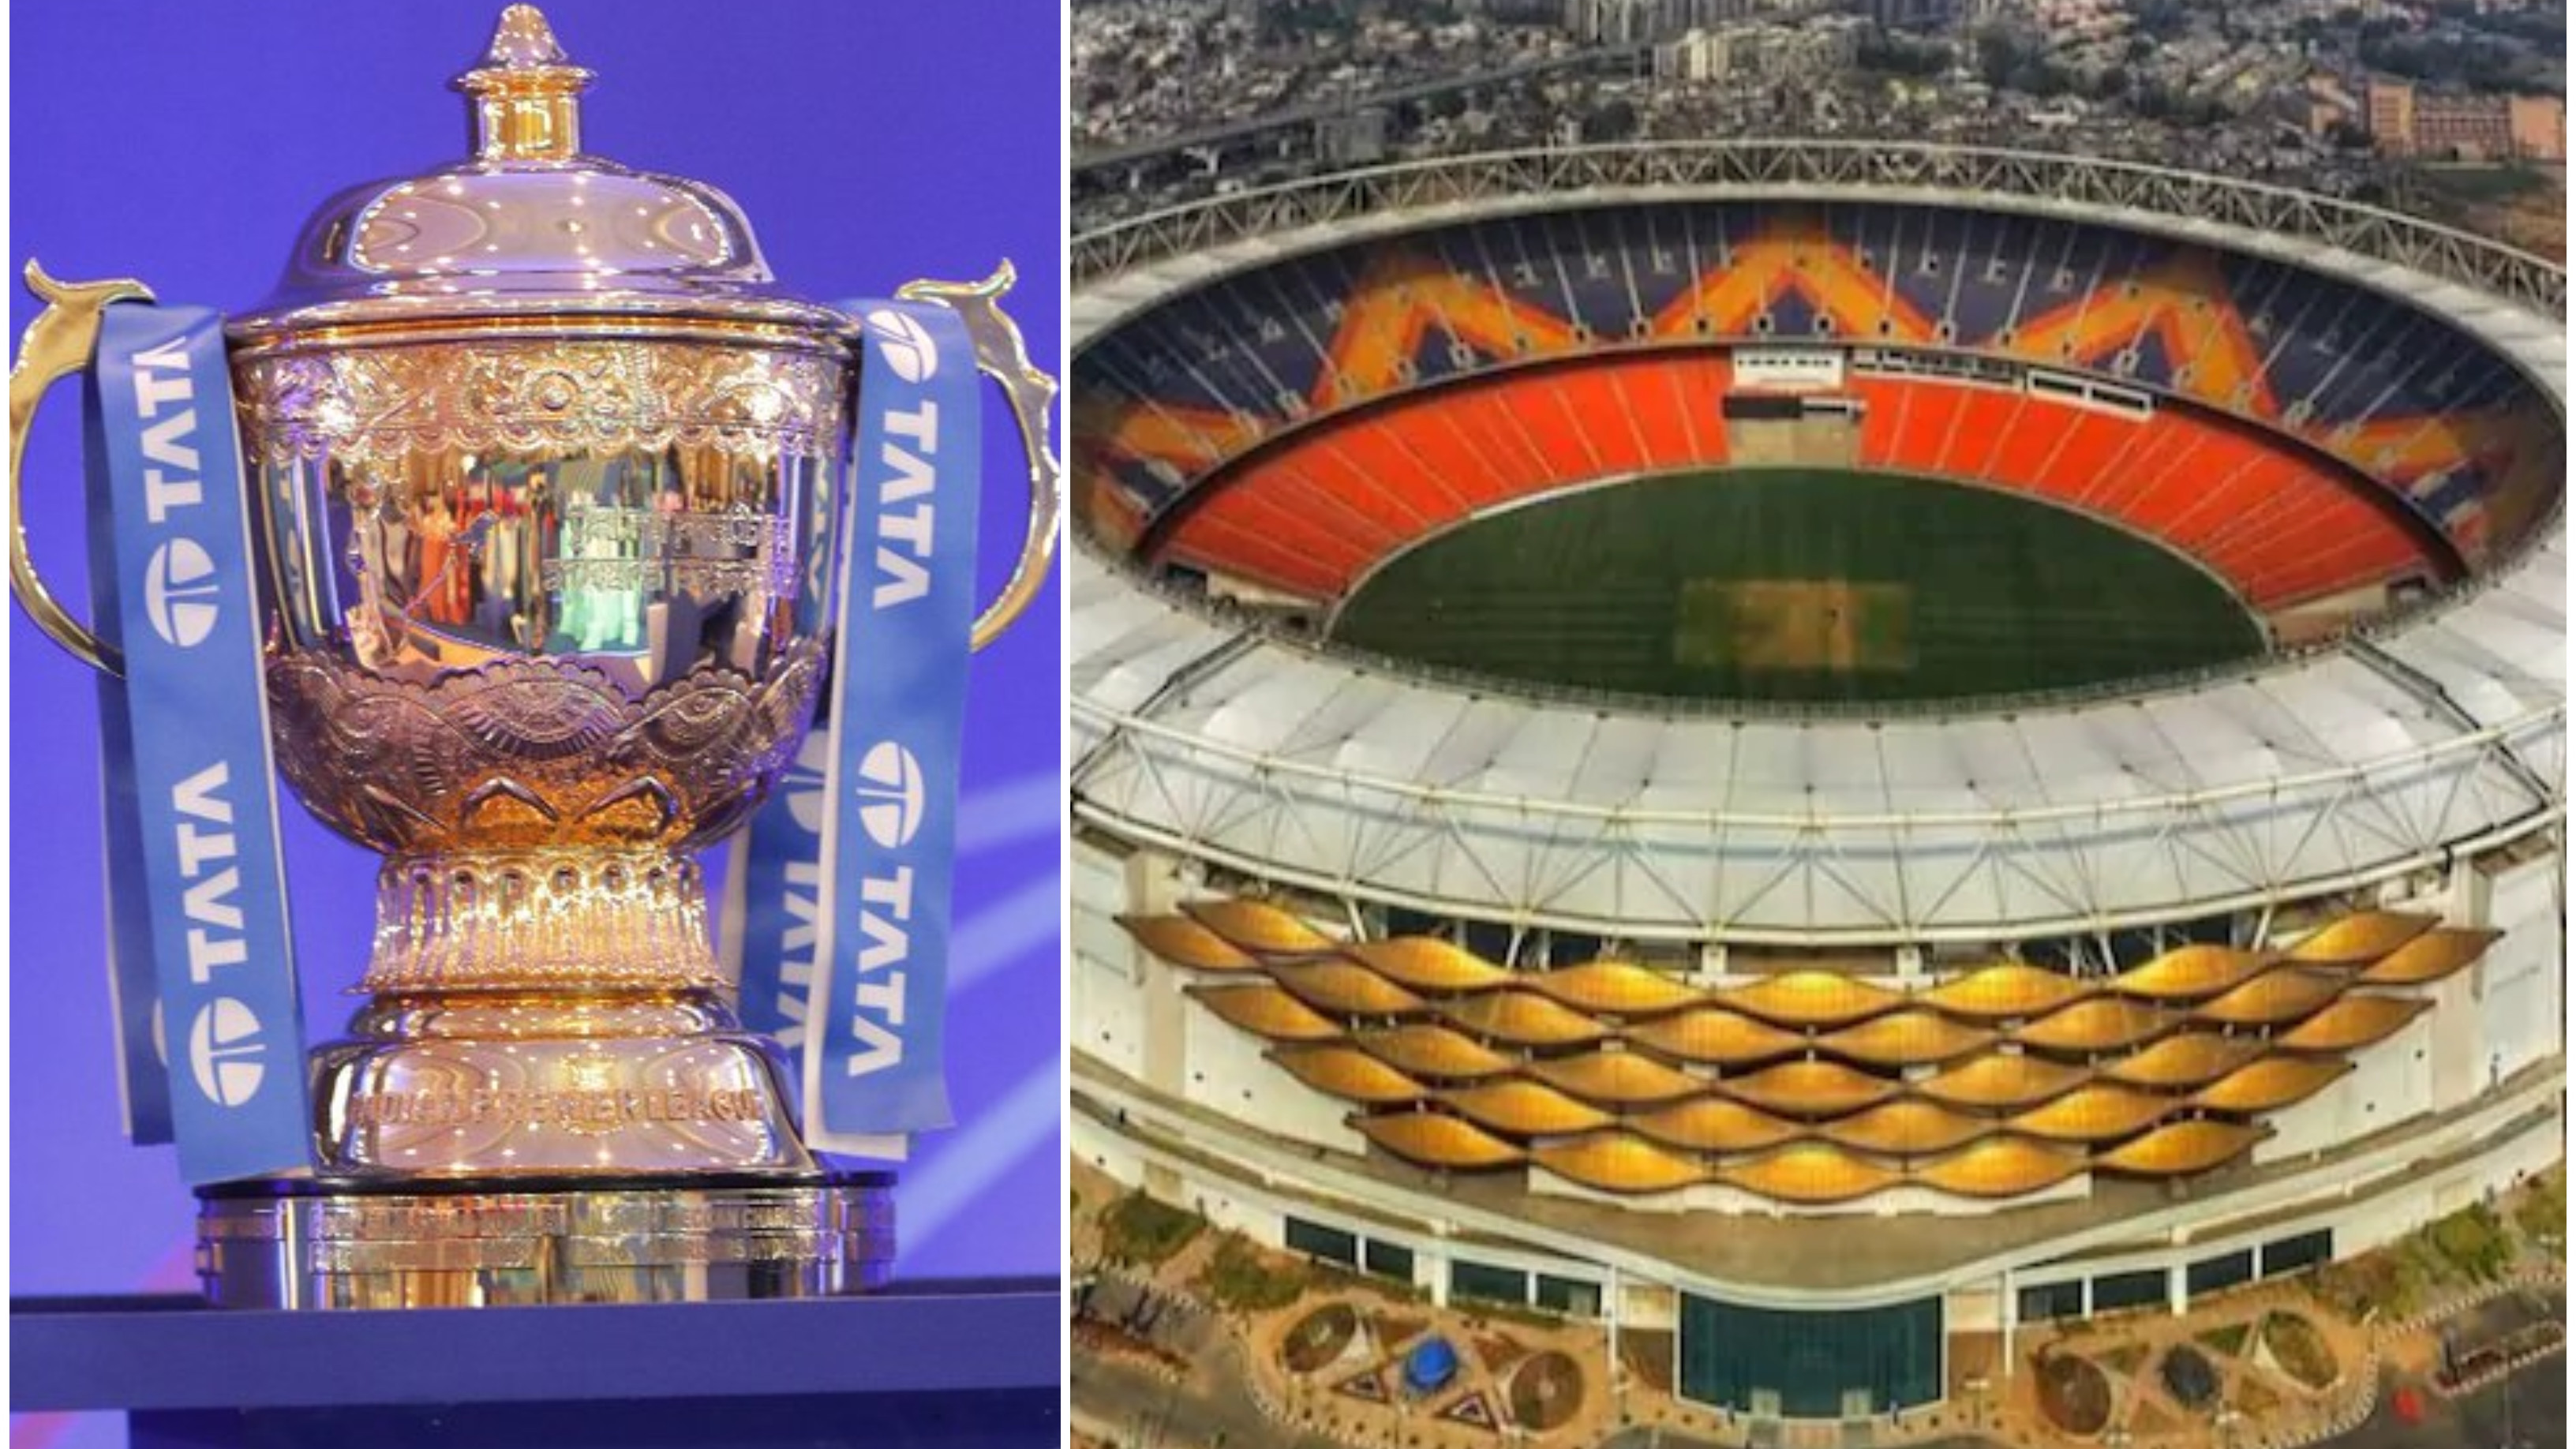 IPL 2022: Ahmedabad likely to host IPL 15 final; playoffs to be staged in Lucknow or Kolkata – Report